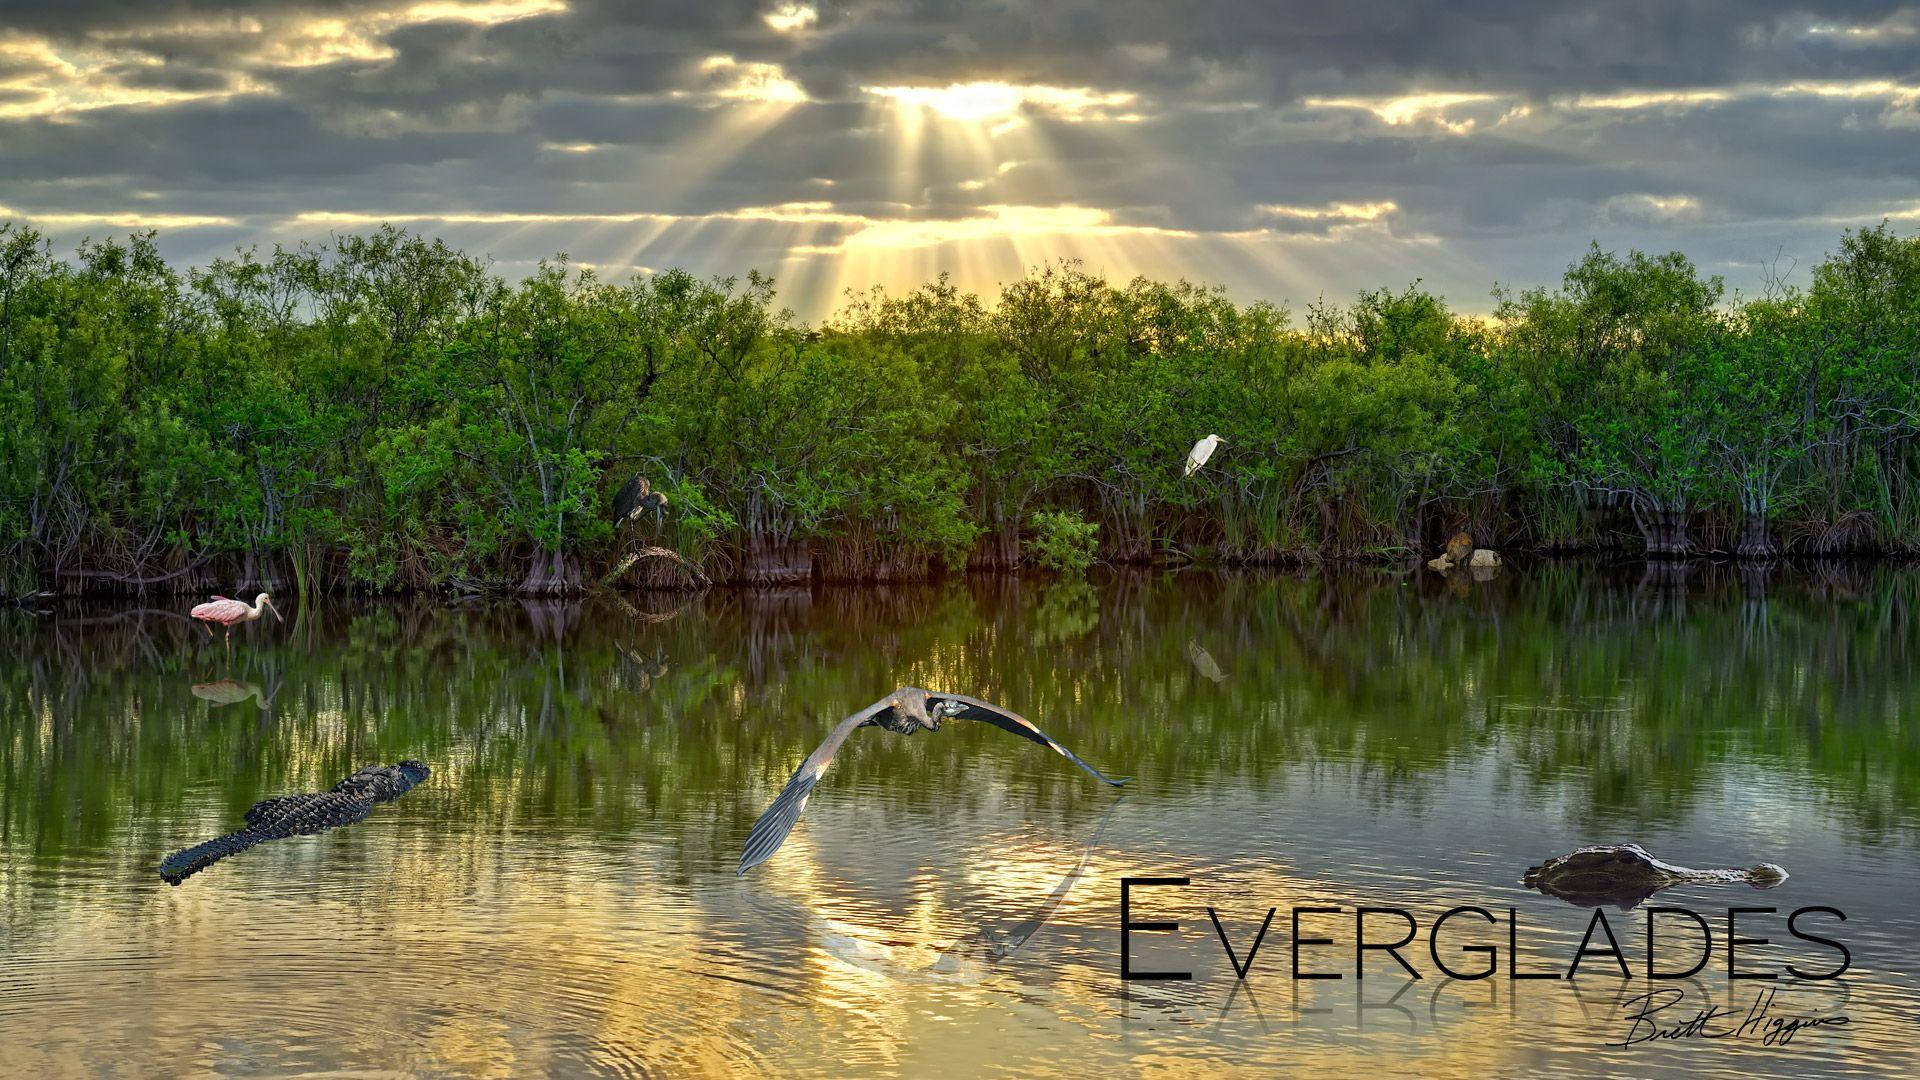 Lake Everglades National Park Picture